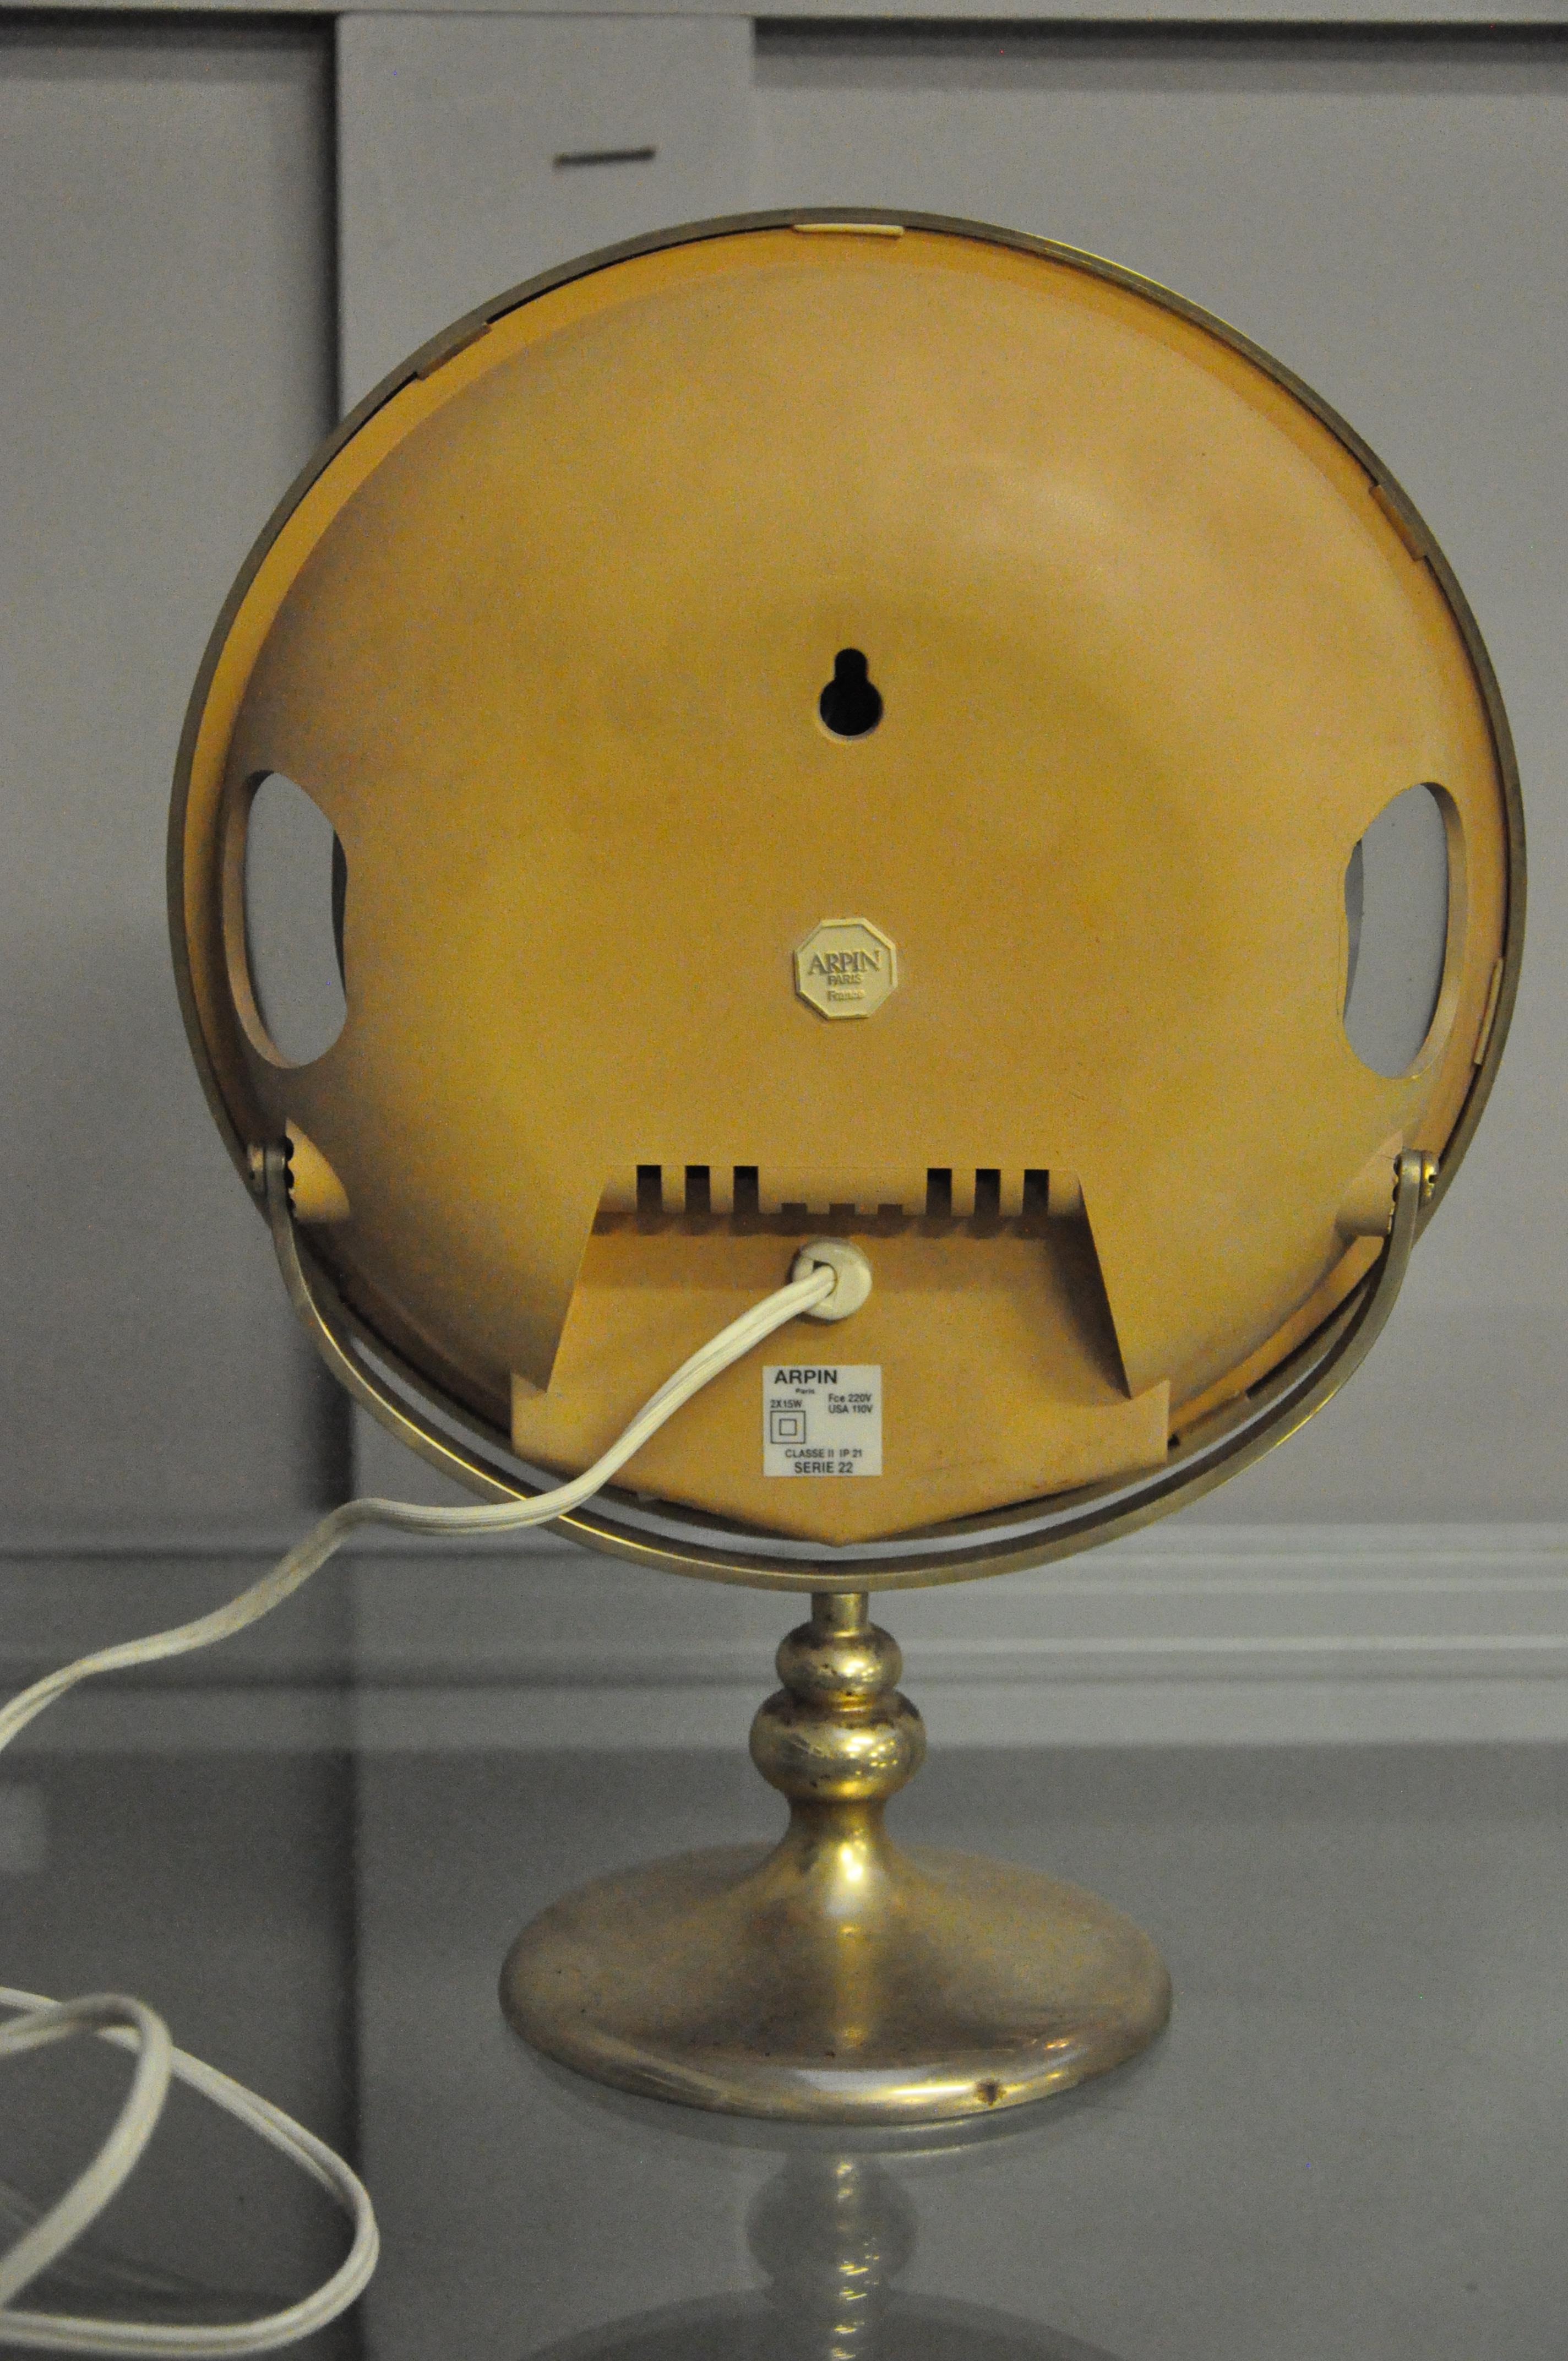 Two vanity mirrors together with display boxes for Cartier, - Image 2 of 8